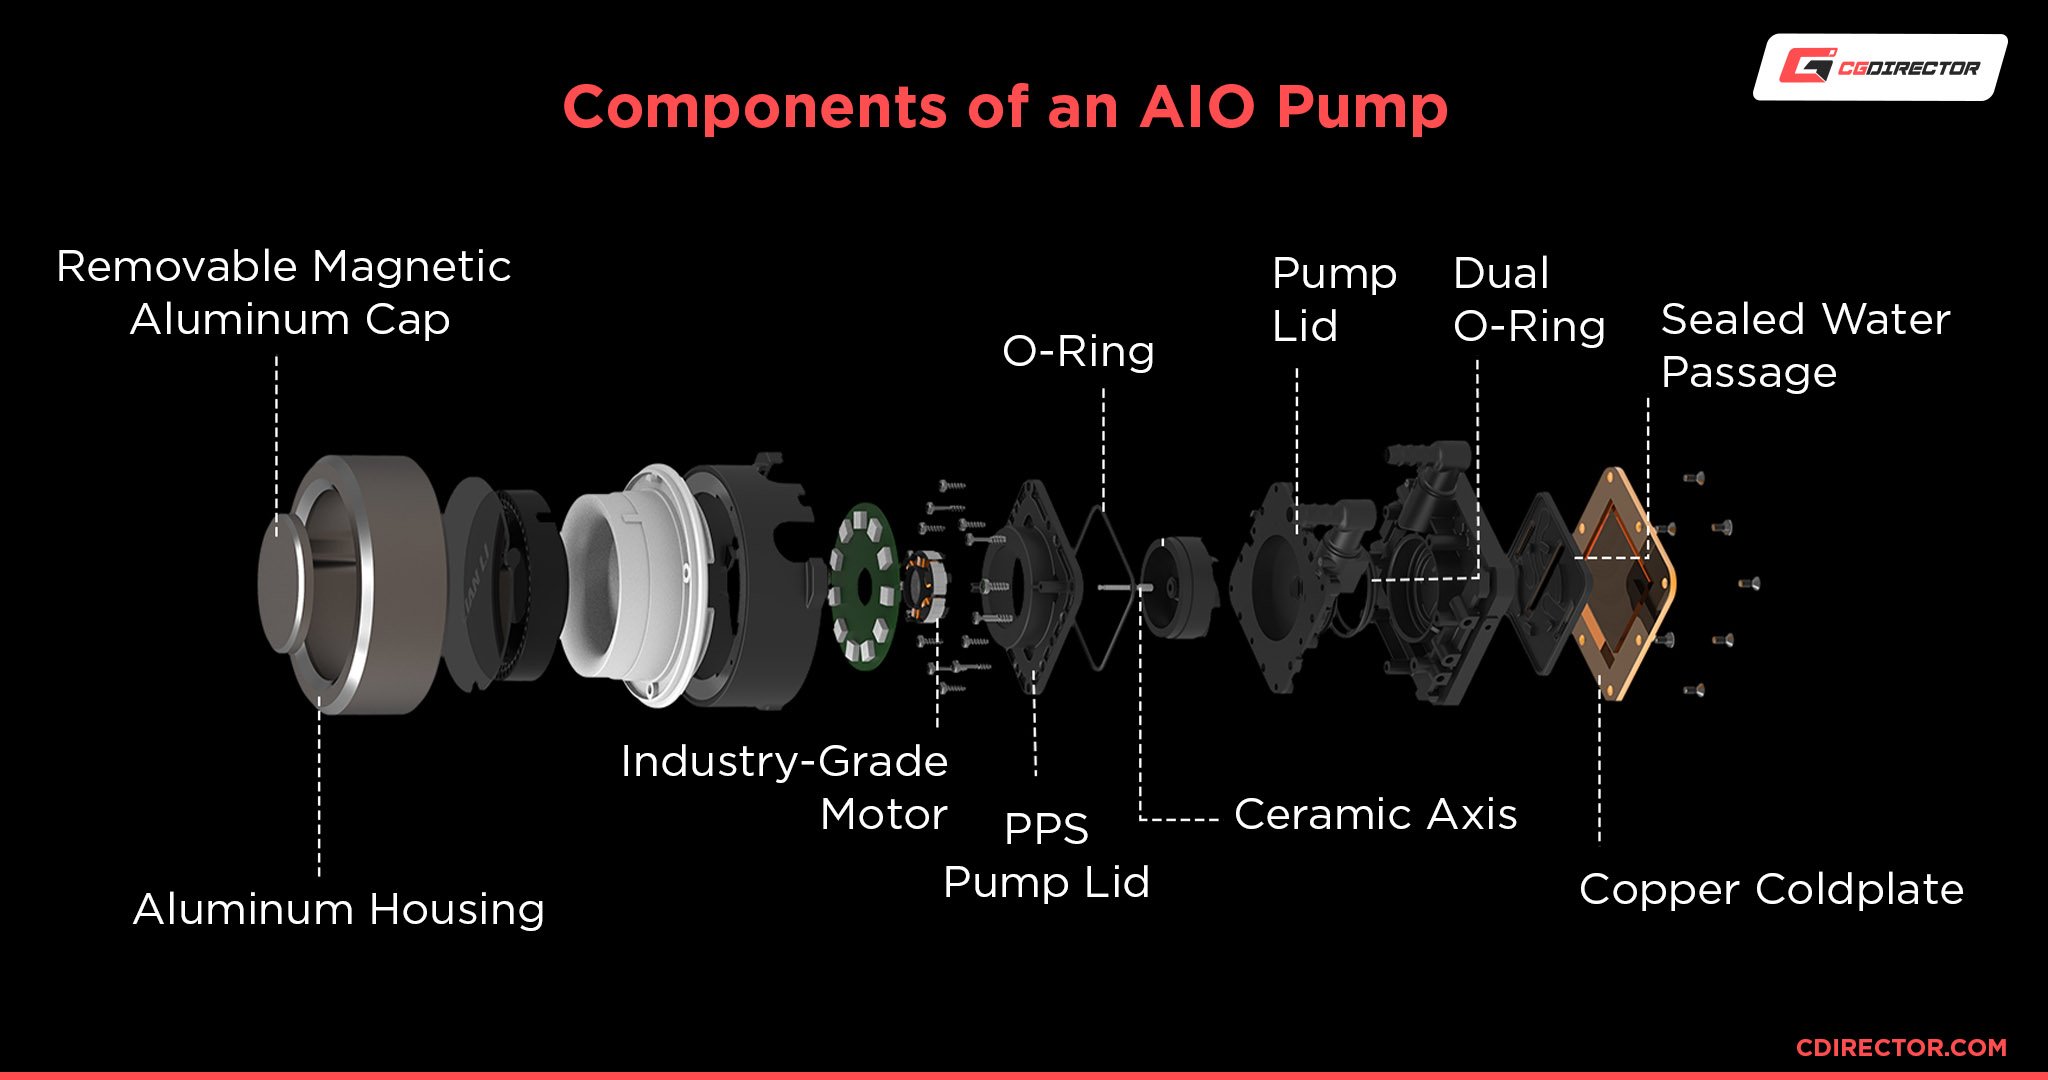 Components of an AIO Pump